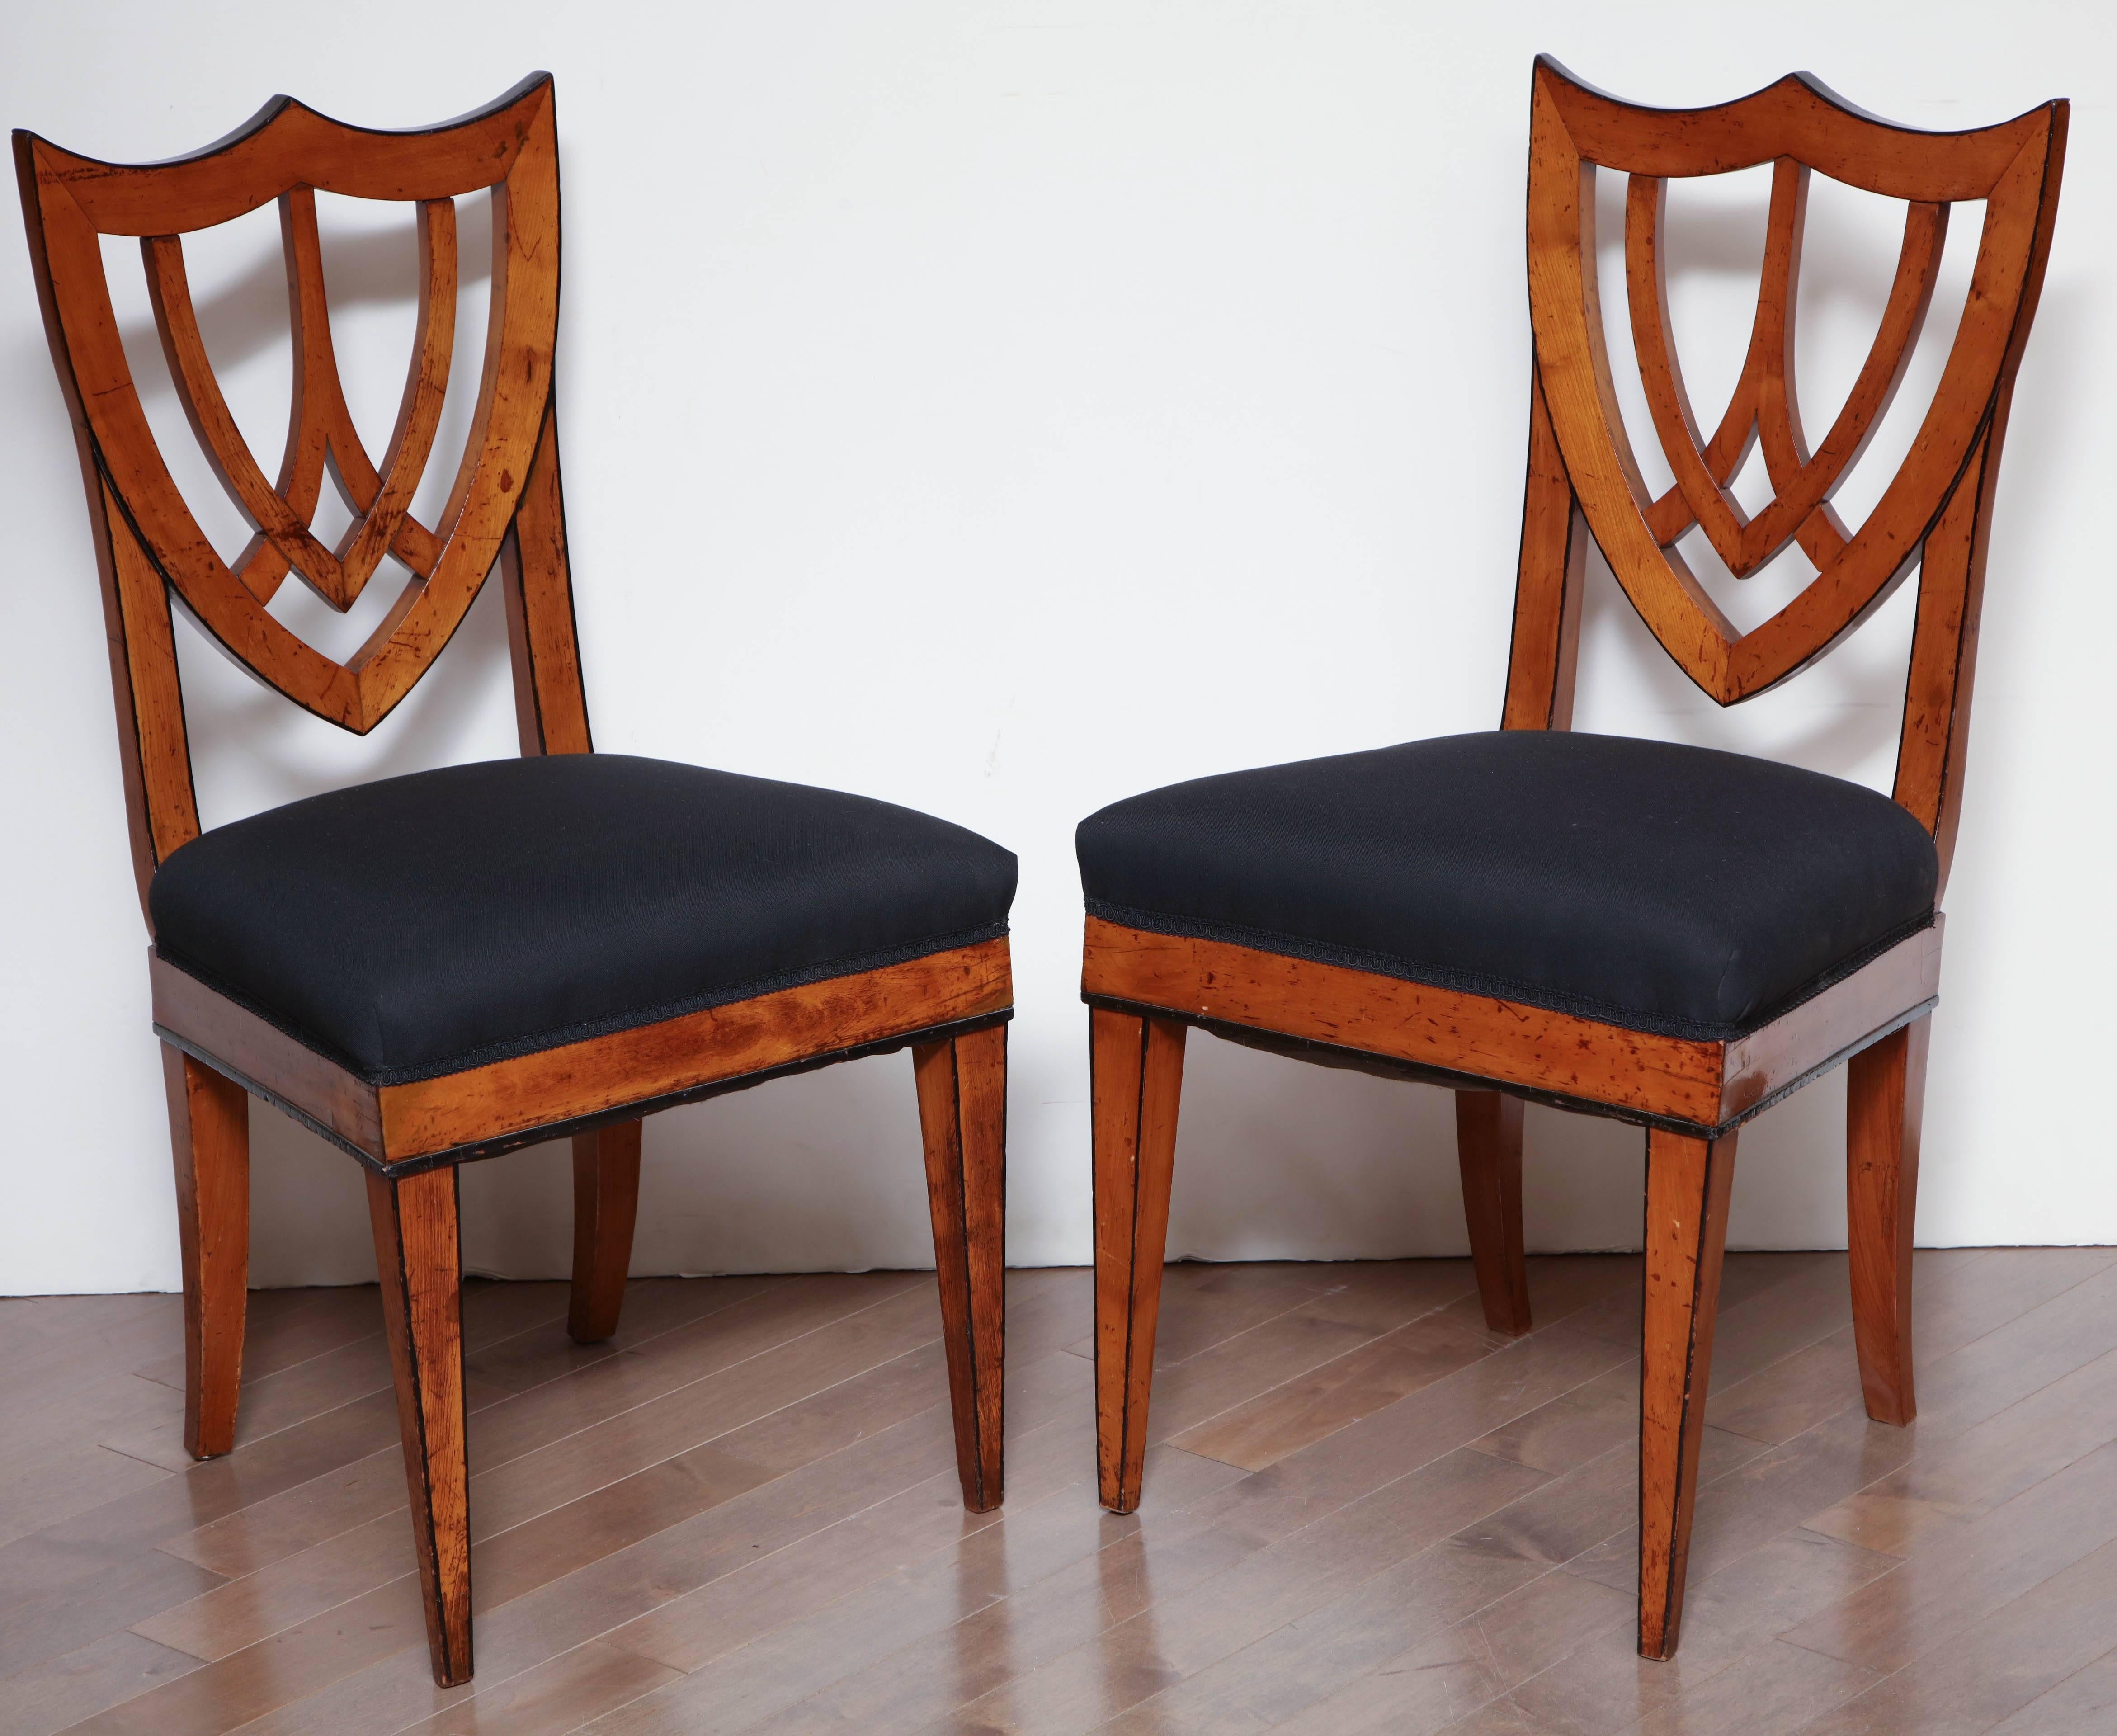 Pair of Viennese side chairs in fruitwood, circa 1830.